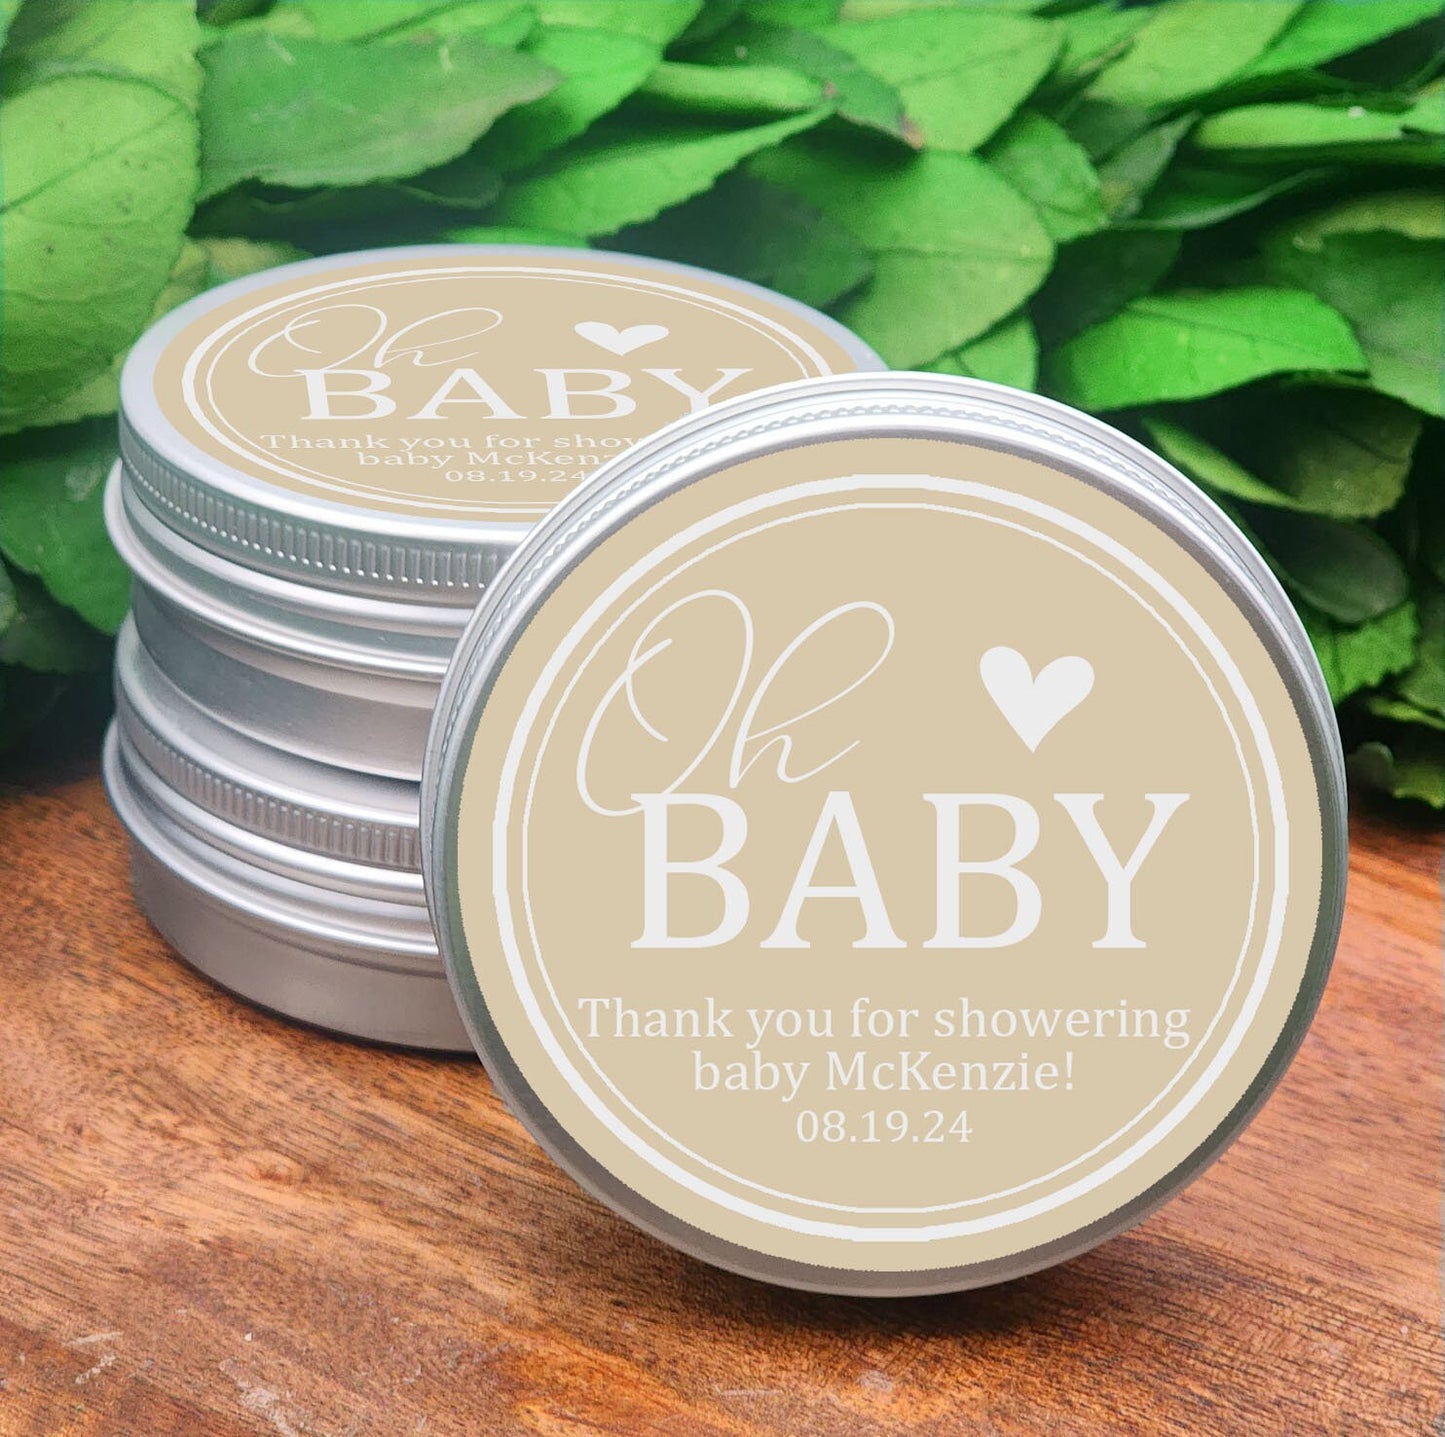 Boho baby shower decorations - boho baby shower favors - oh baby favor - bulk baby shower soap favors - baby shower candle favors